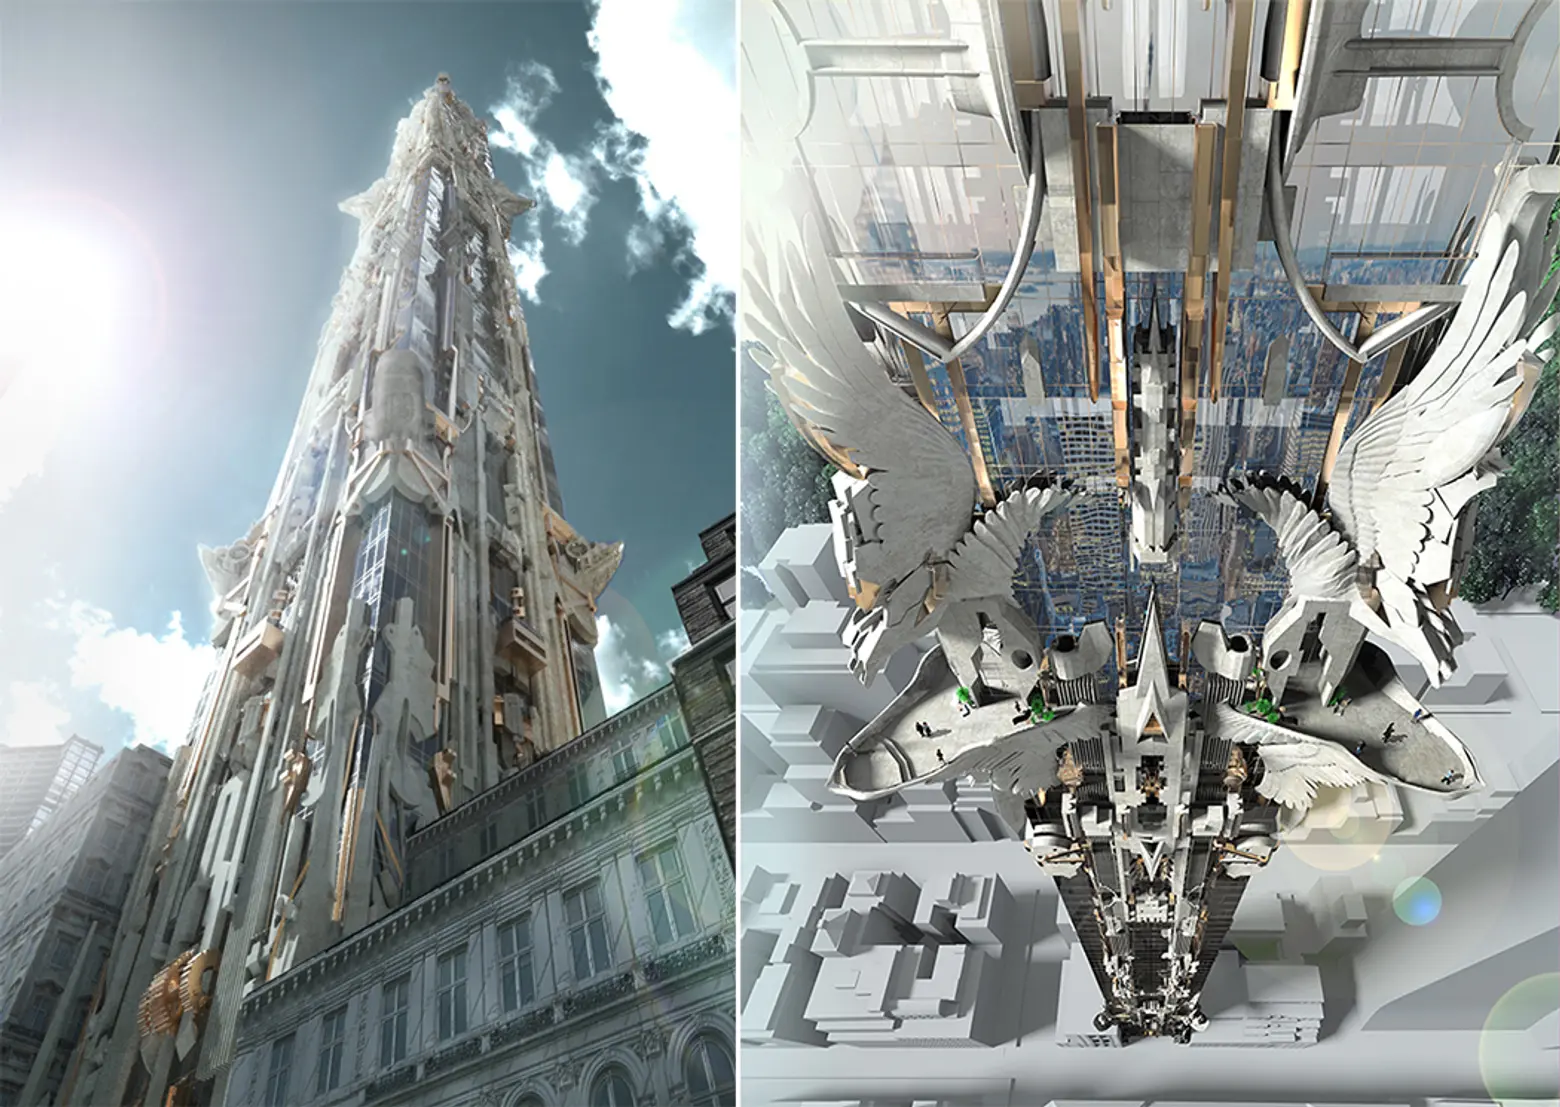 Could This Otherworldly 102-Story Tower Covered in Ornaments Be Coming to 57th Street?